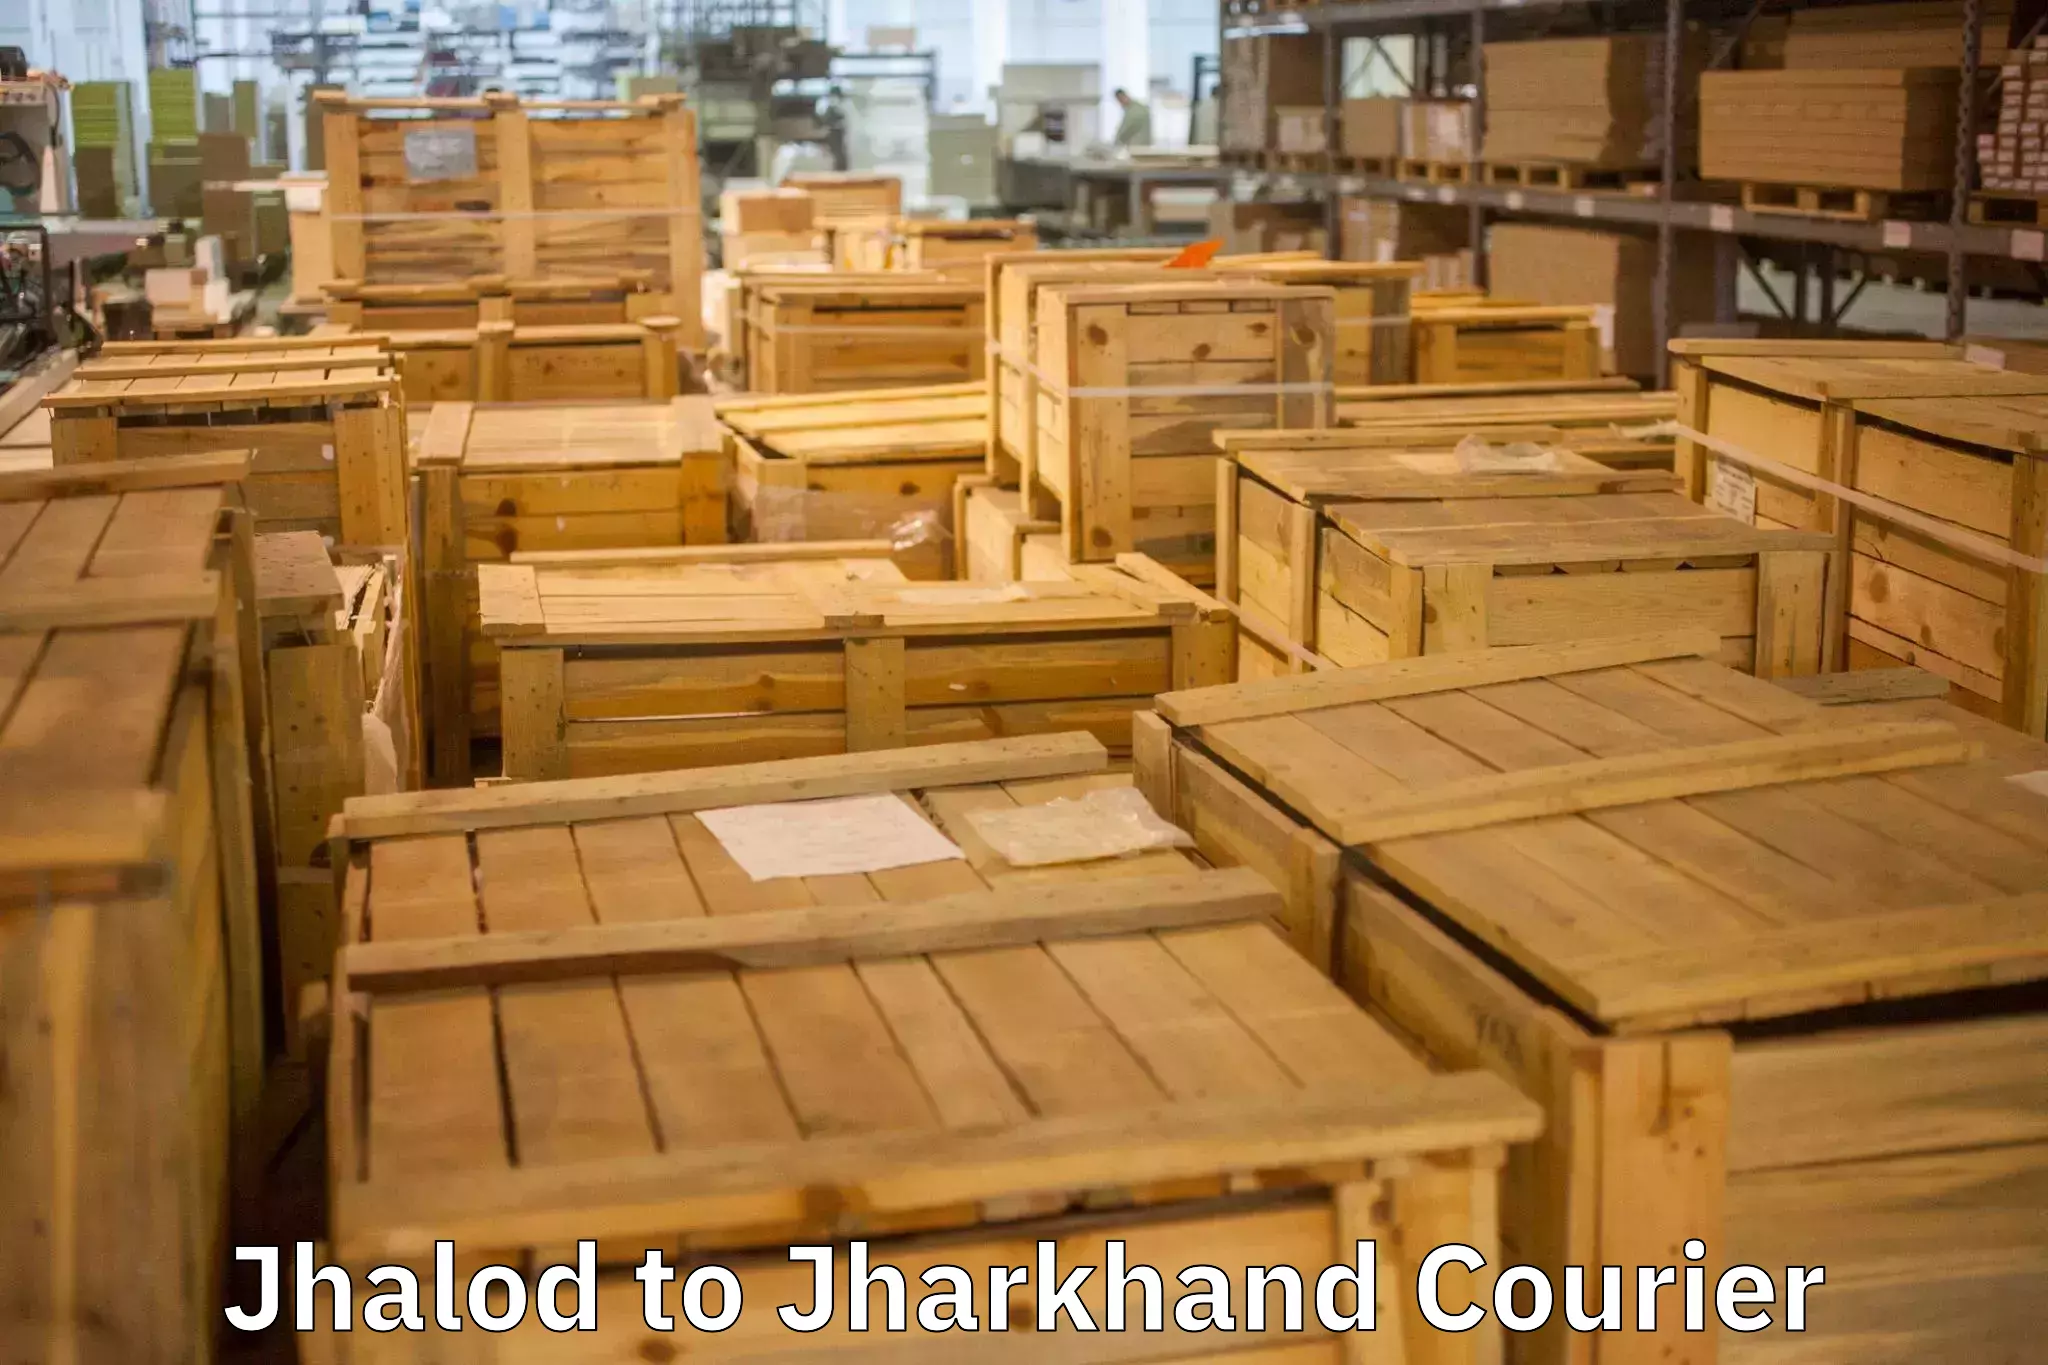 Dependable moving services Jhalod to Chaibasa